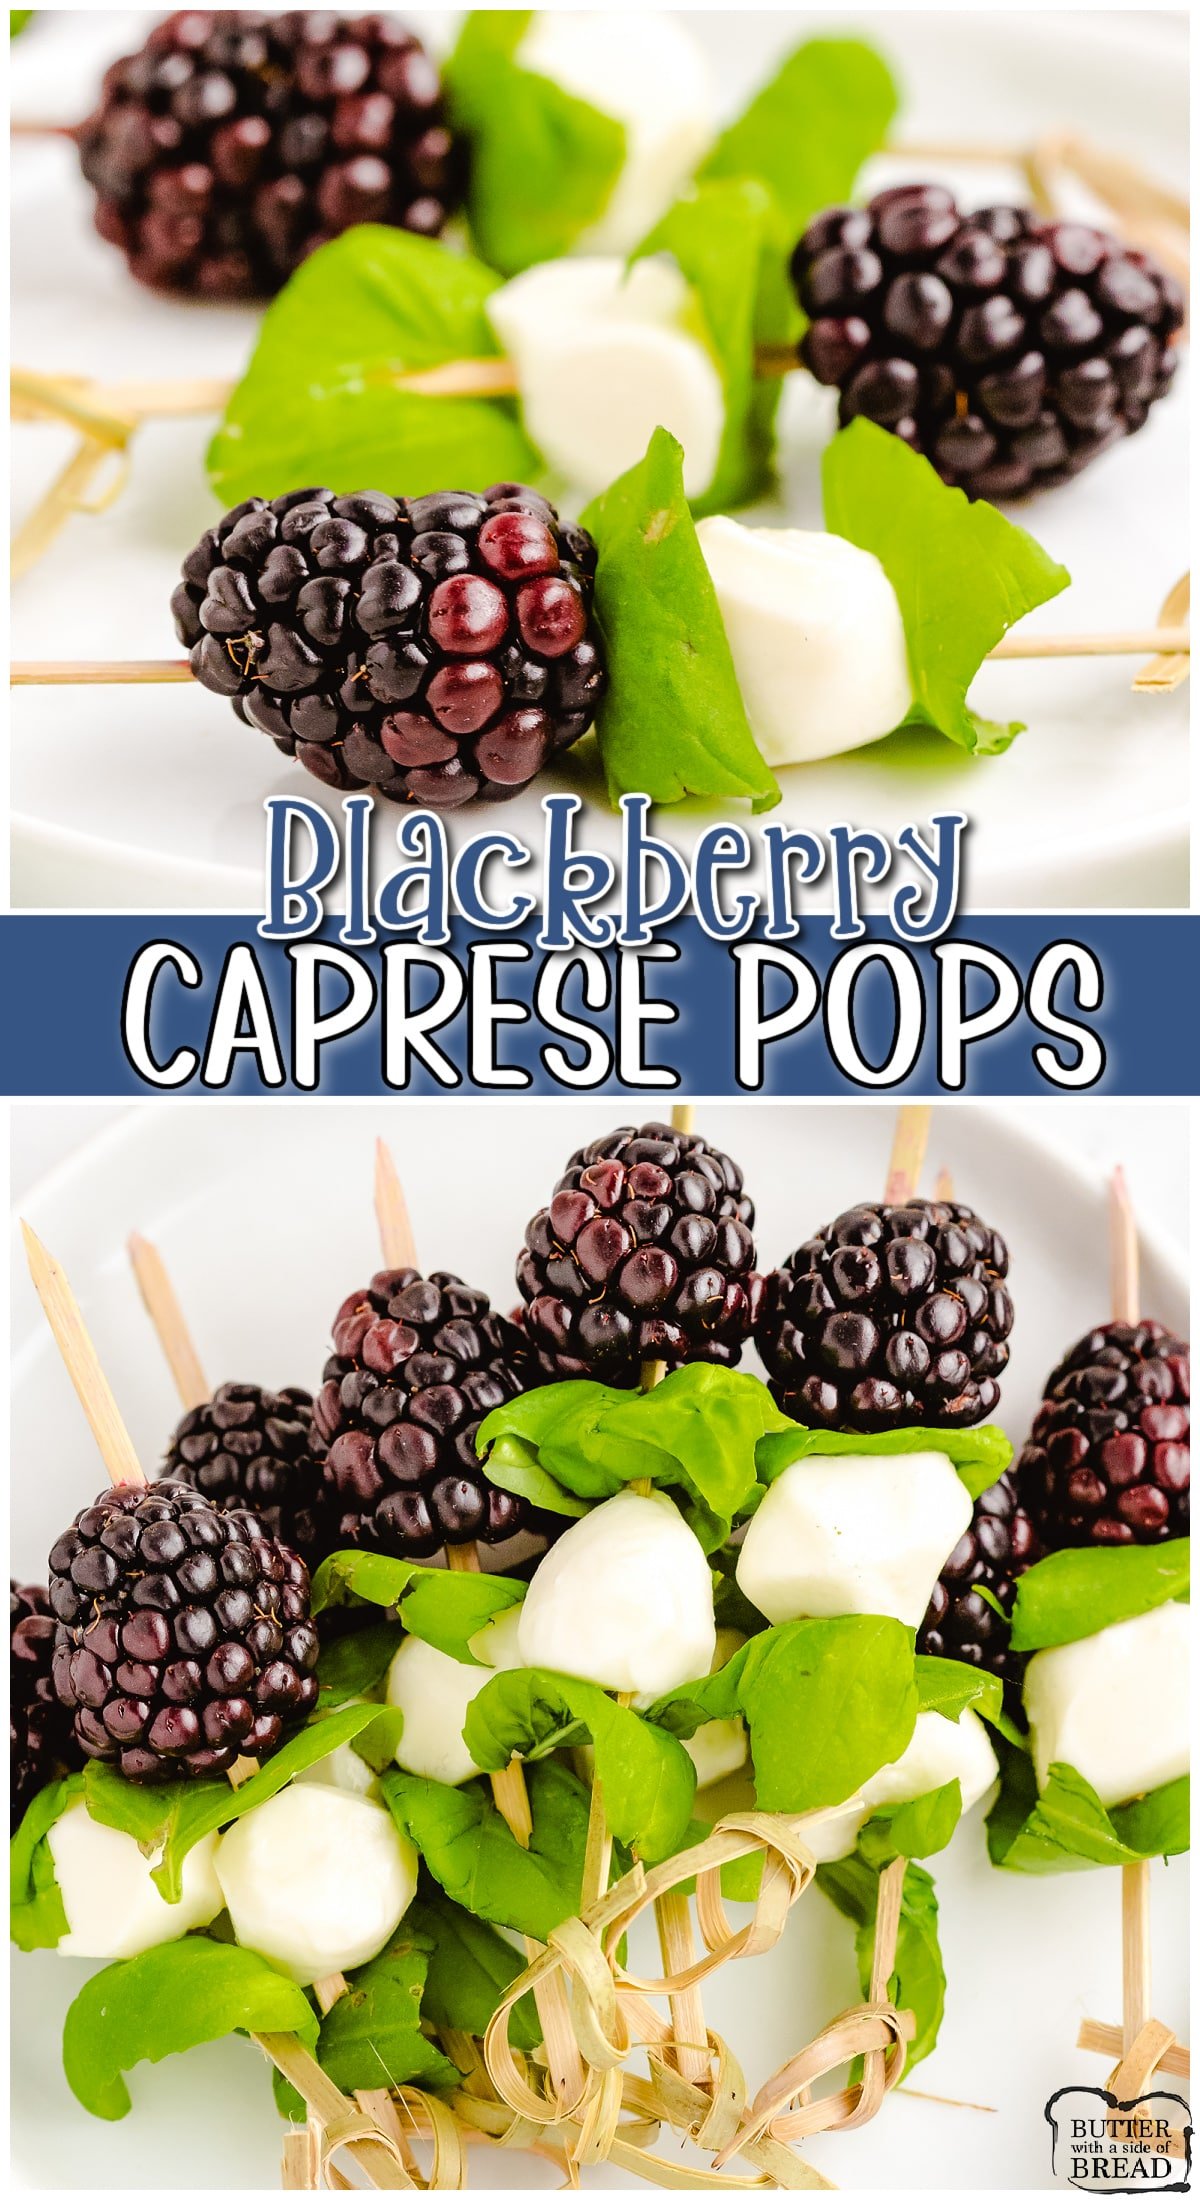 Blackberry Caprese Skewers are gorgeous appetizers made in minutes with only 3 simple ingredients! Tasty caprese pops with fresh berry flavors!